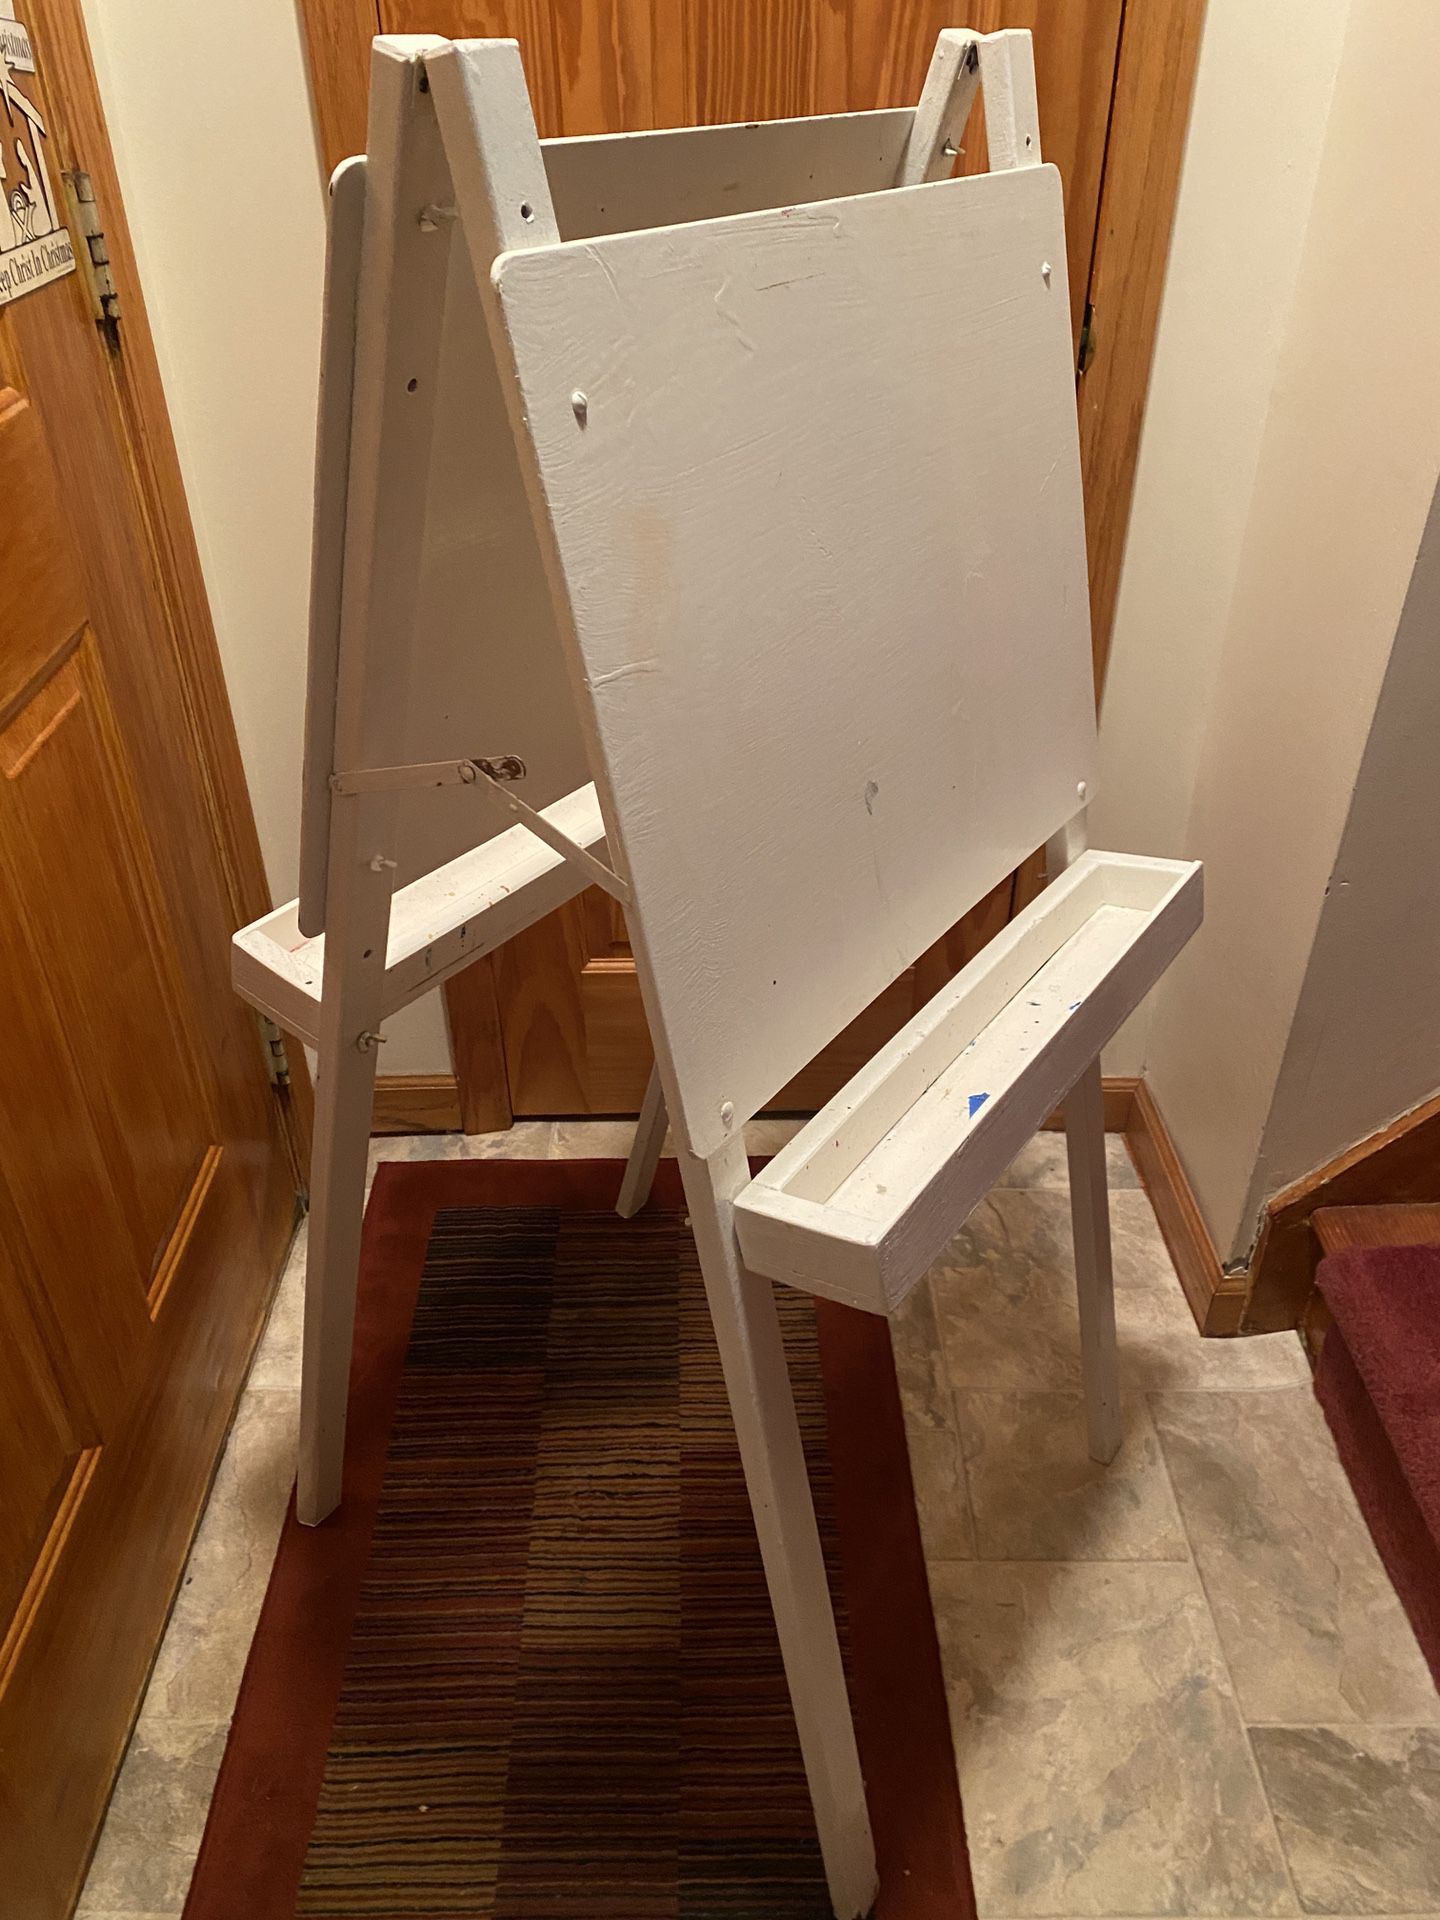 Vtg Solid Wood Painted White Double Sided Easel with Storage Trays 49” high by 22” wide